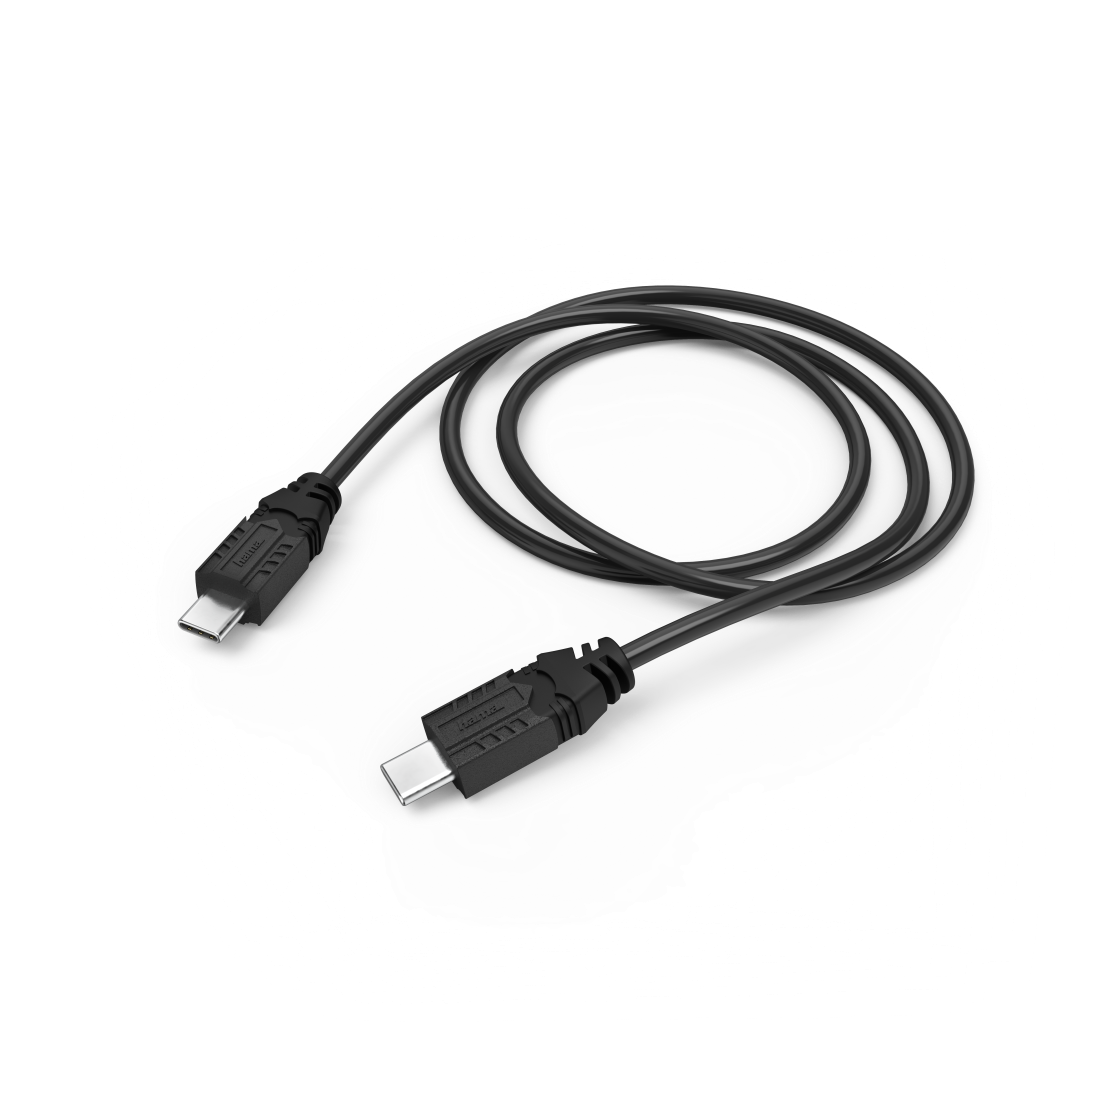 00054462 Hama "Basic" Controller-USB-C Charging Cable for PS5, 3 m